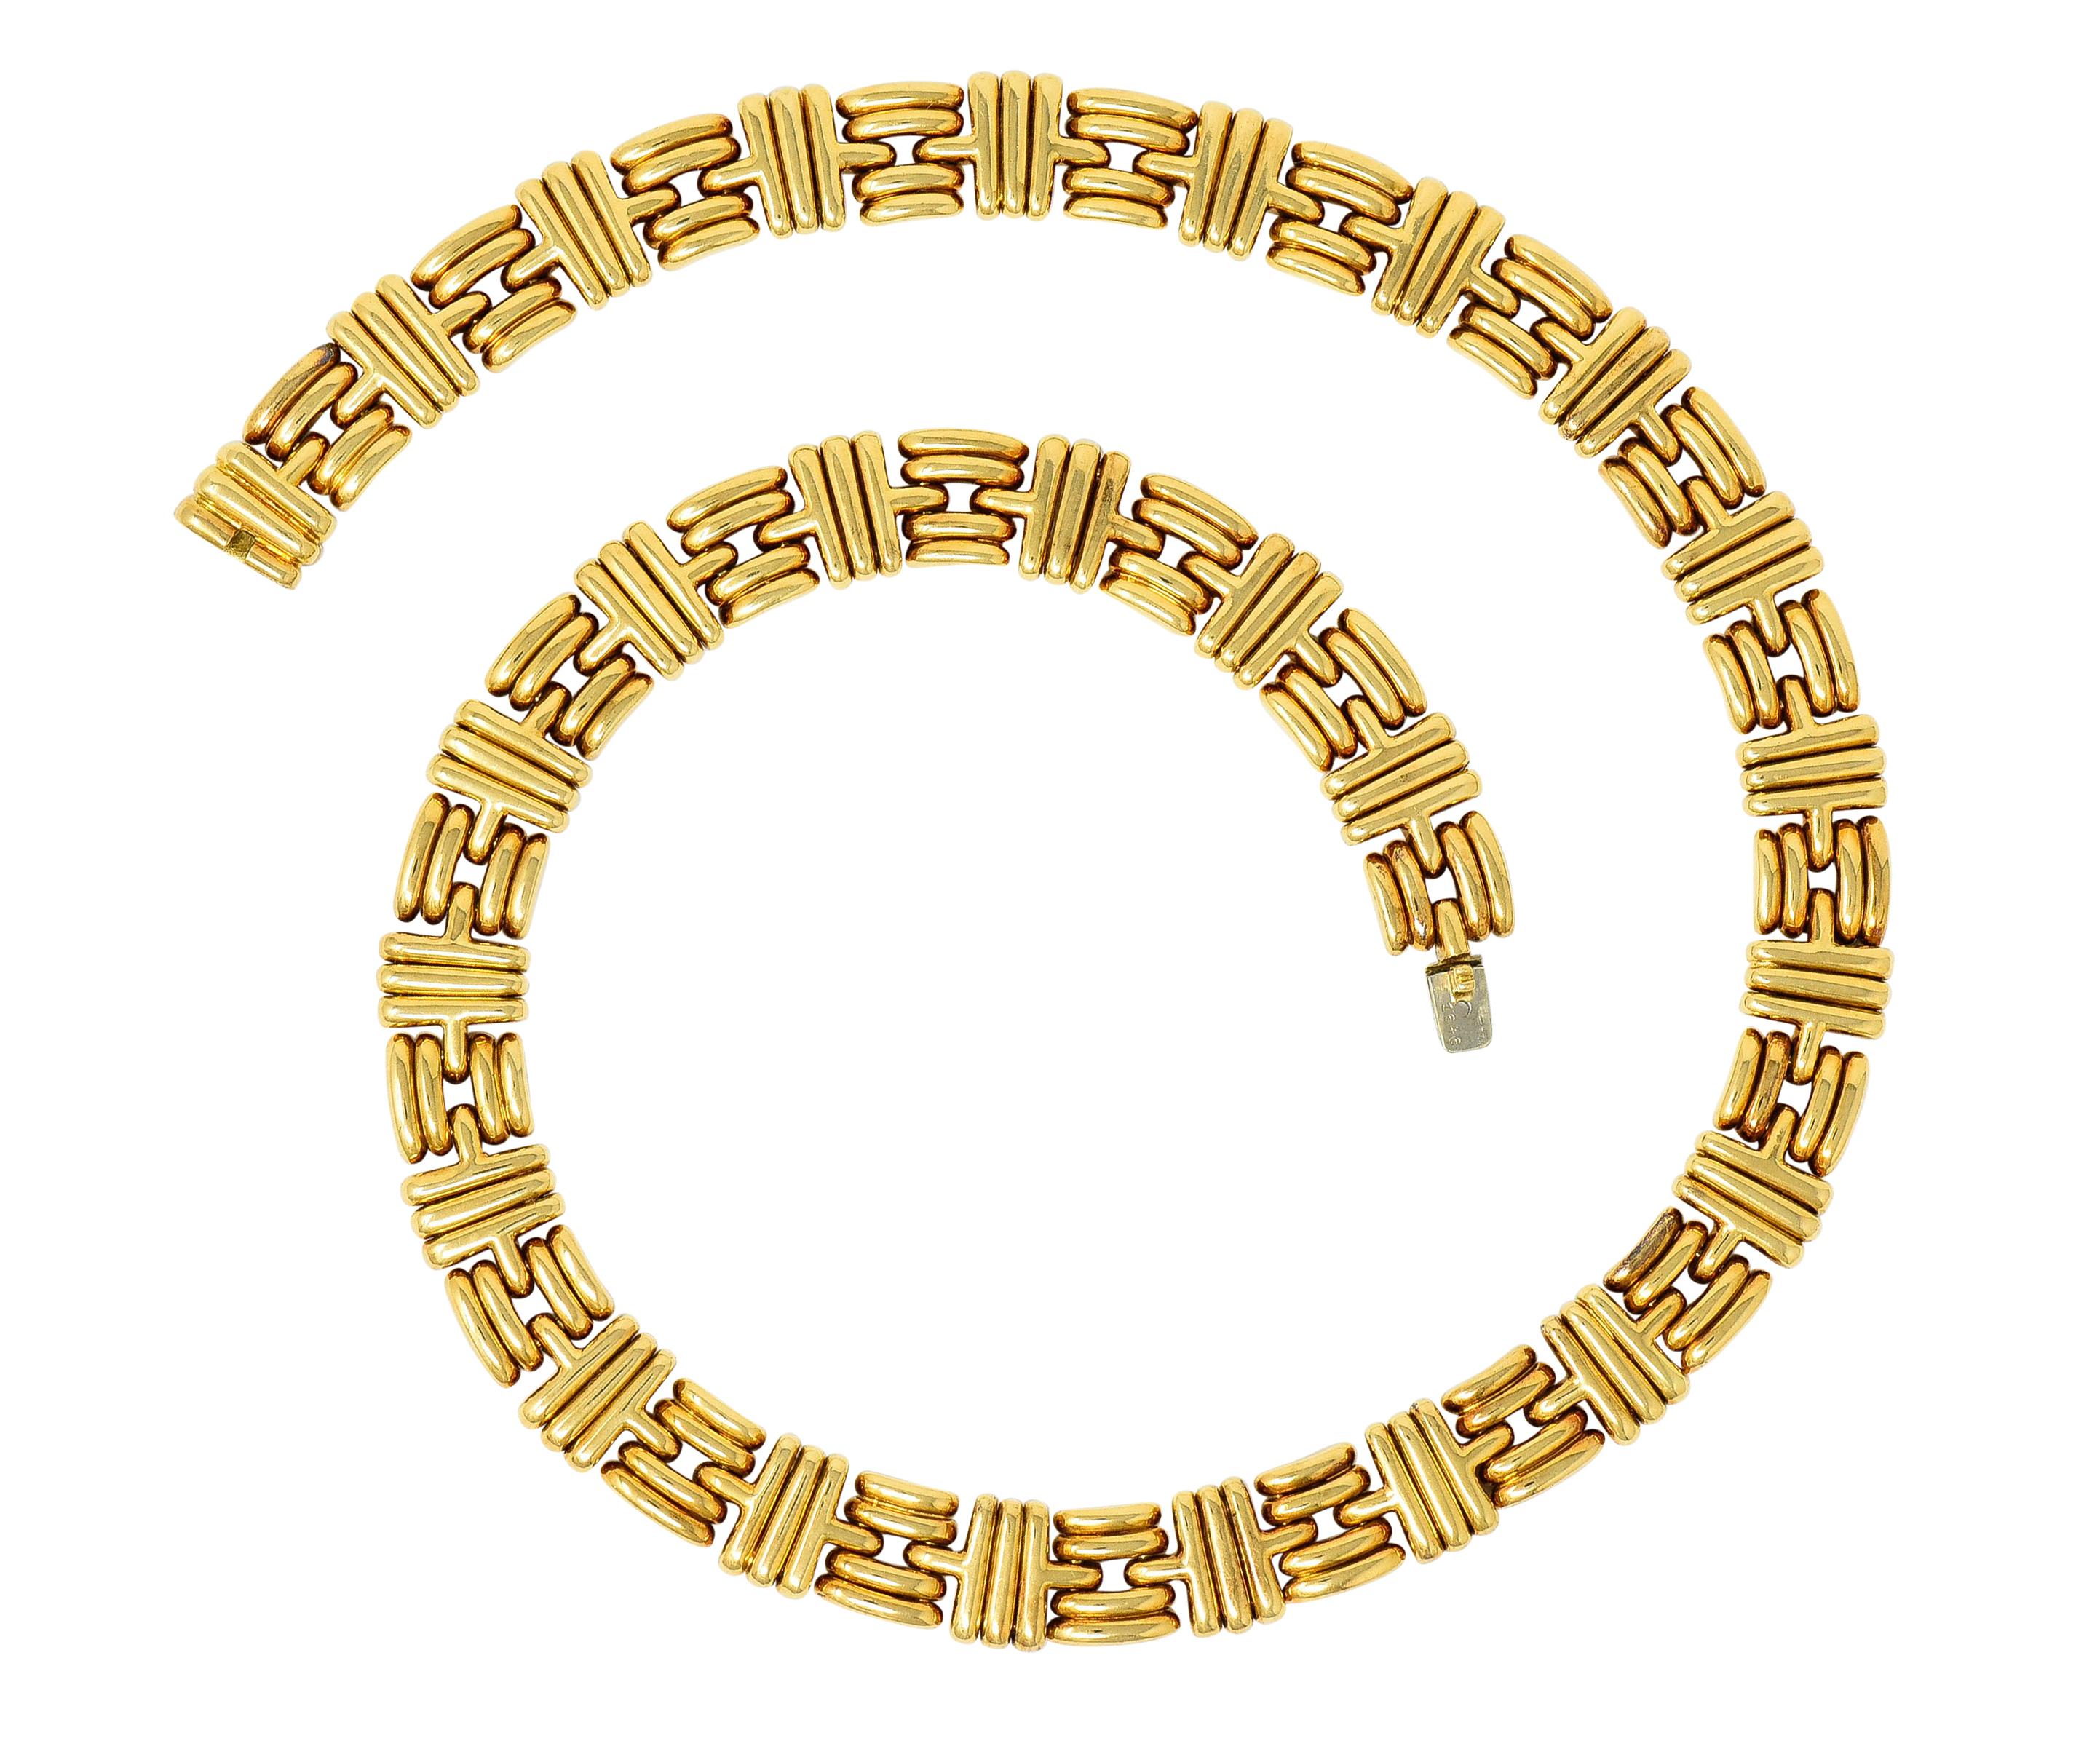 Collar style necklace comprised of stylized ribbed links featuring two designs

One link being four horizontal segments alternating with second link of three vertical segments

Completed by a polished finish and a concealed clasp with a fold-over